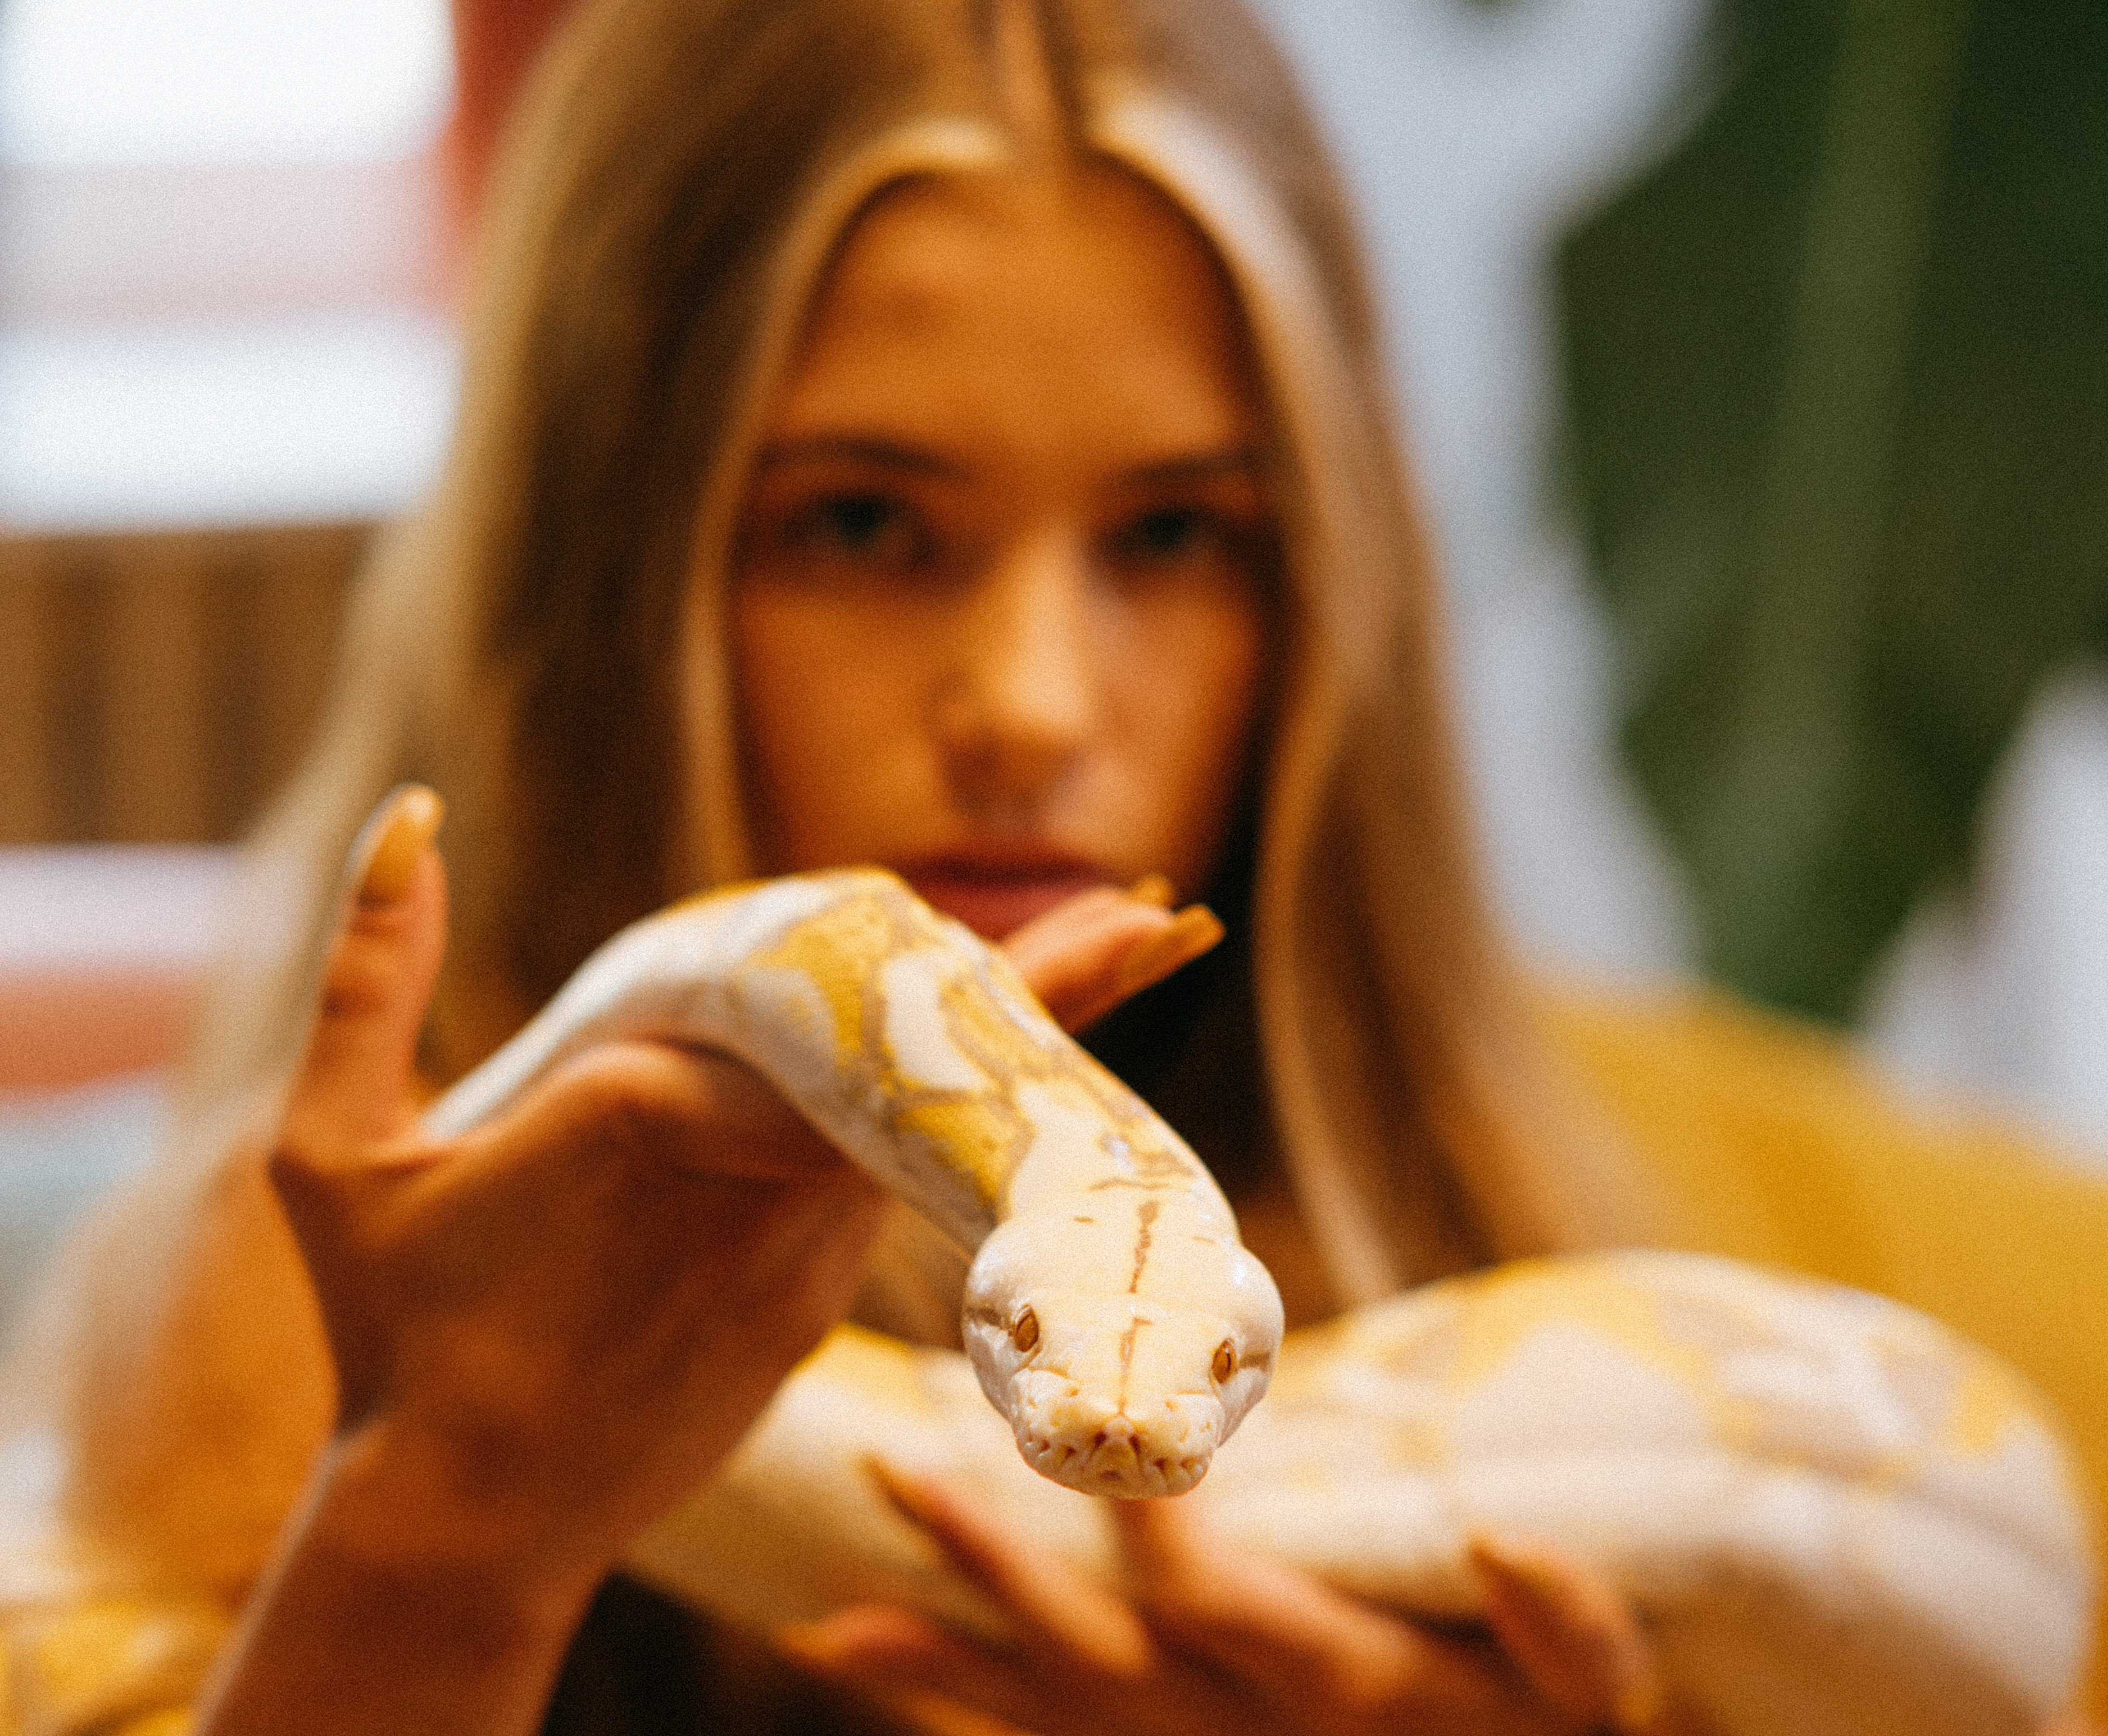 Since OP loved snakes, his girlfriend planned to surprise him with a picture of her holding a Kenyan sand boa. | Source: Pexels 